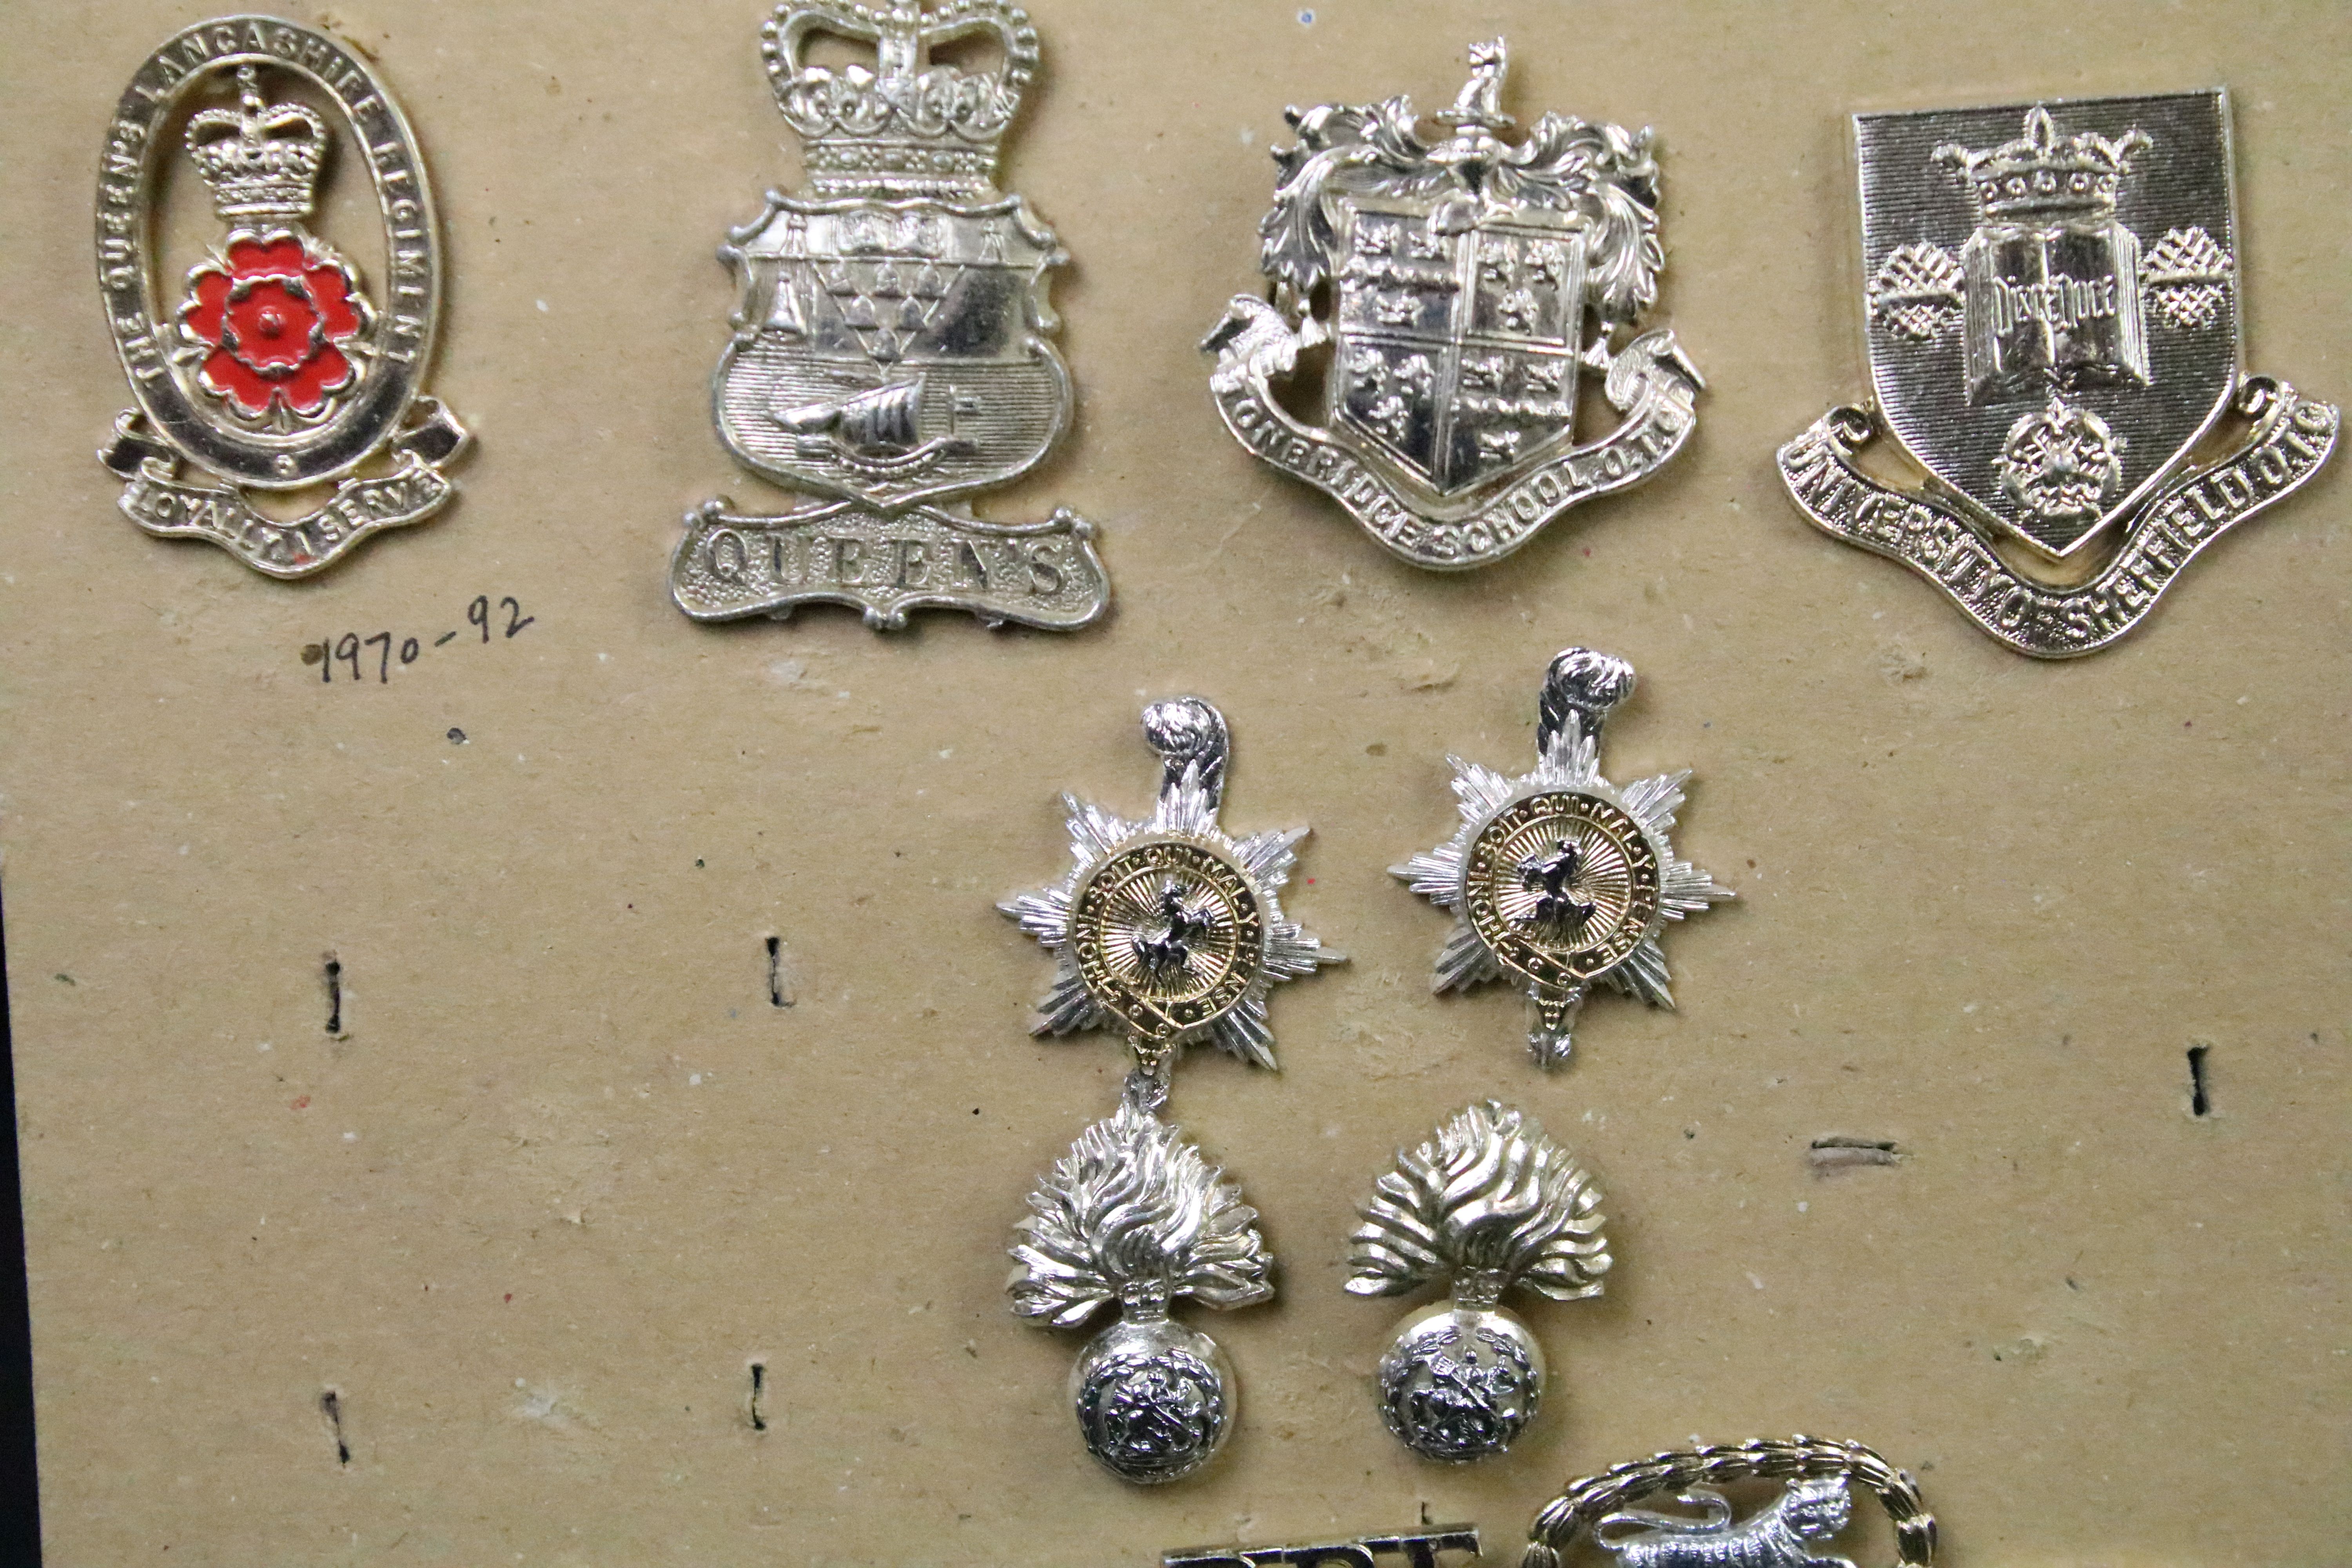 A collection of British military Regimental cap and collar badges to include the Yorkshire Regiment, - Image 12 of 13